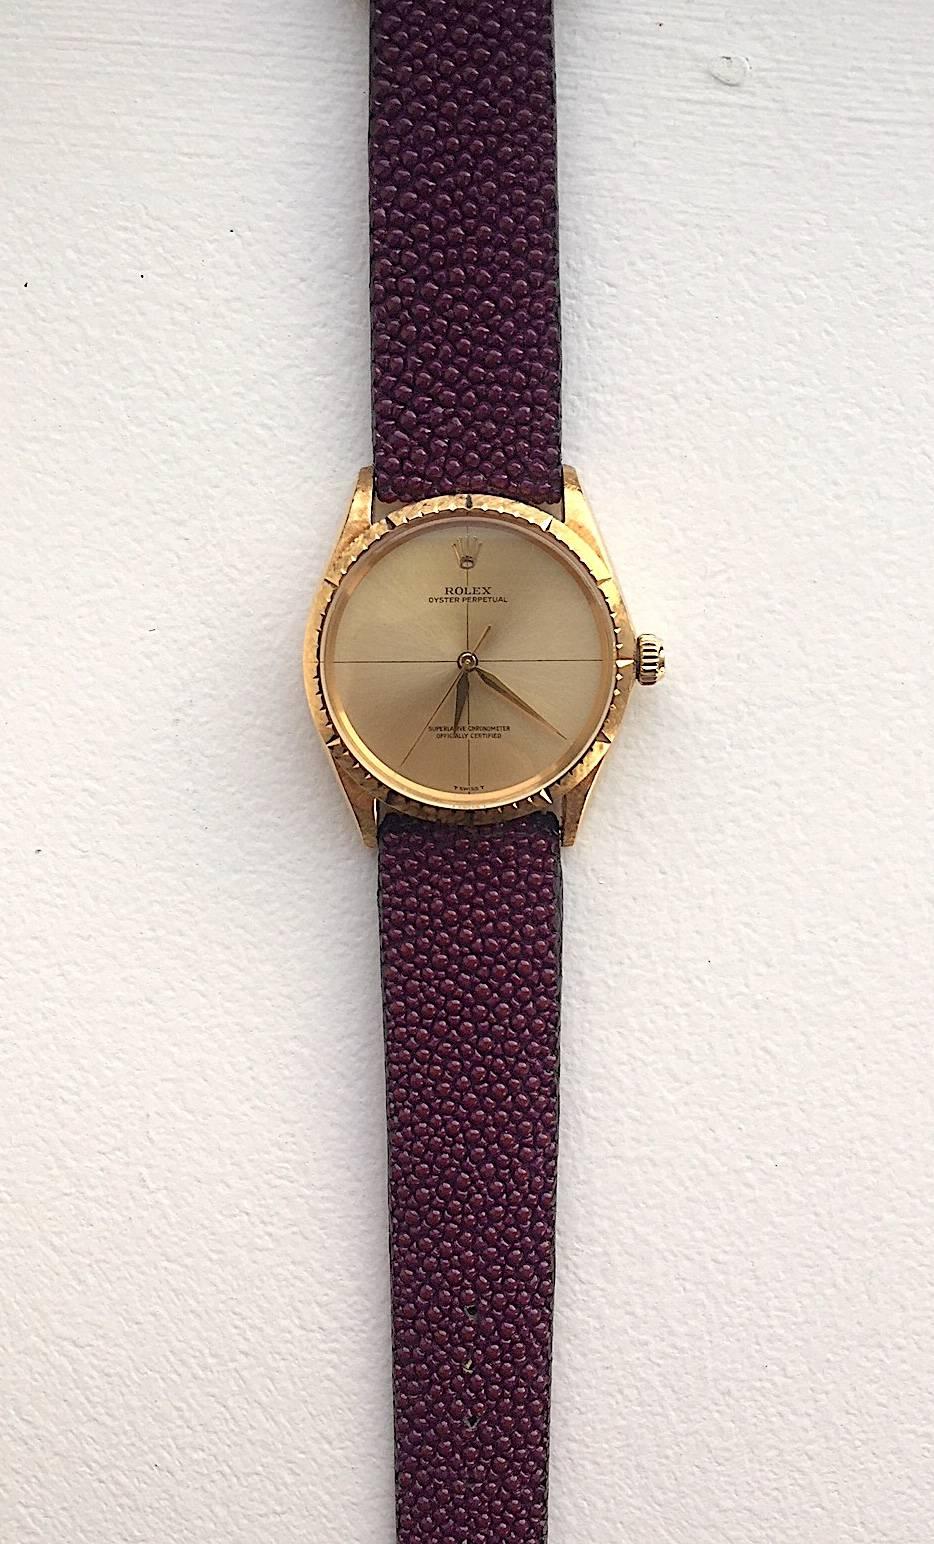 1960 gold rolex oyster perpetual